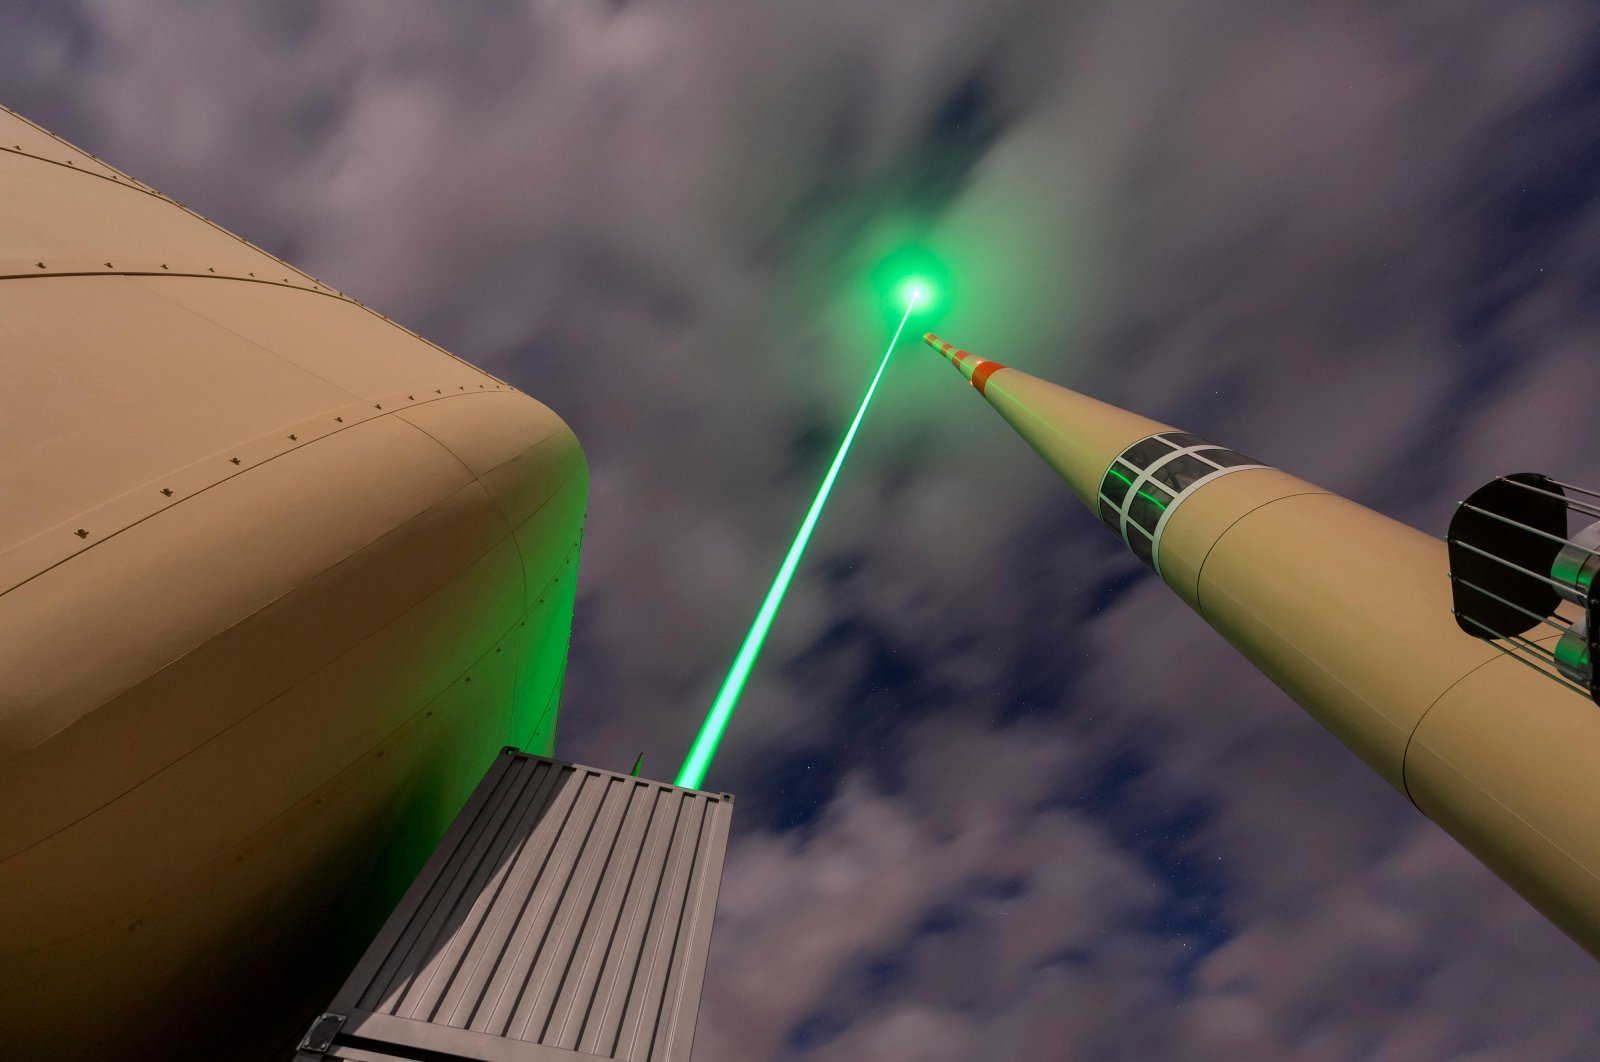 The Laser Lightning Rod, an experimental lighting protection device that diverts the path of lightning bolts using a high-power laser, at the top of Mount Santis, Switzerland, Jan. 16, 2023. (Reuters Photo)